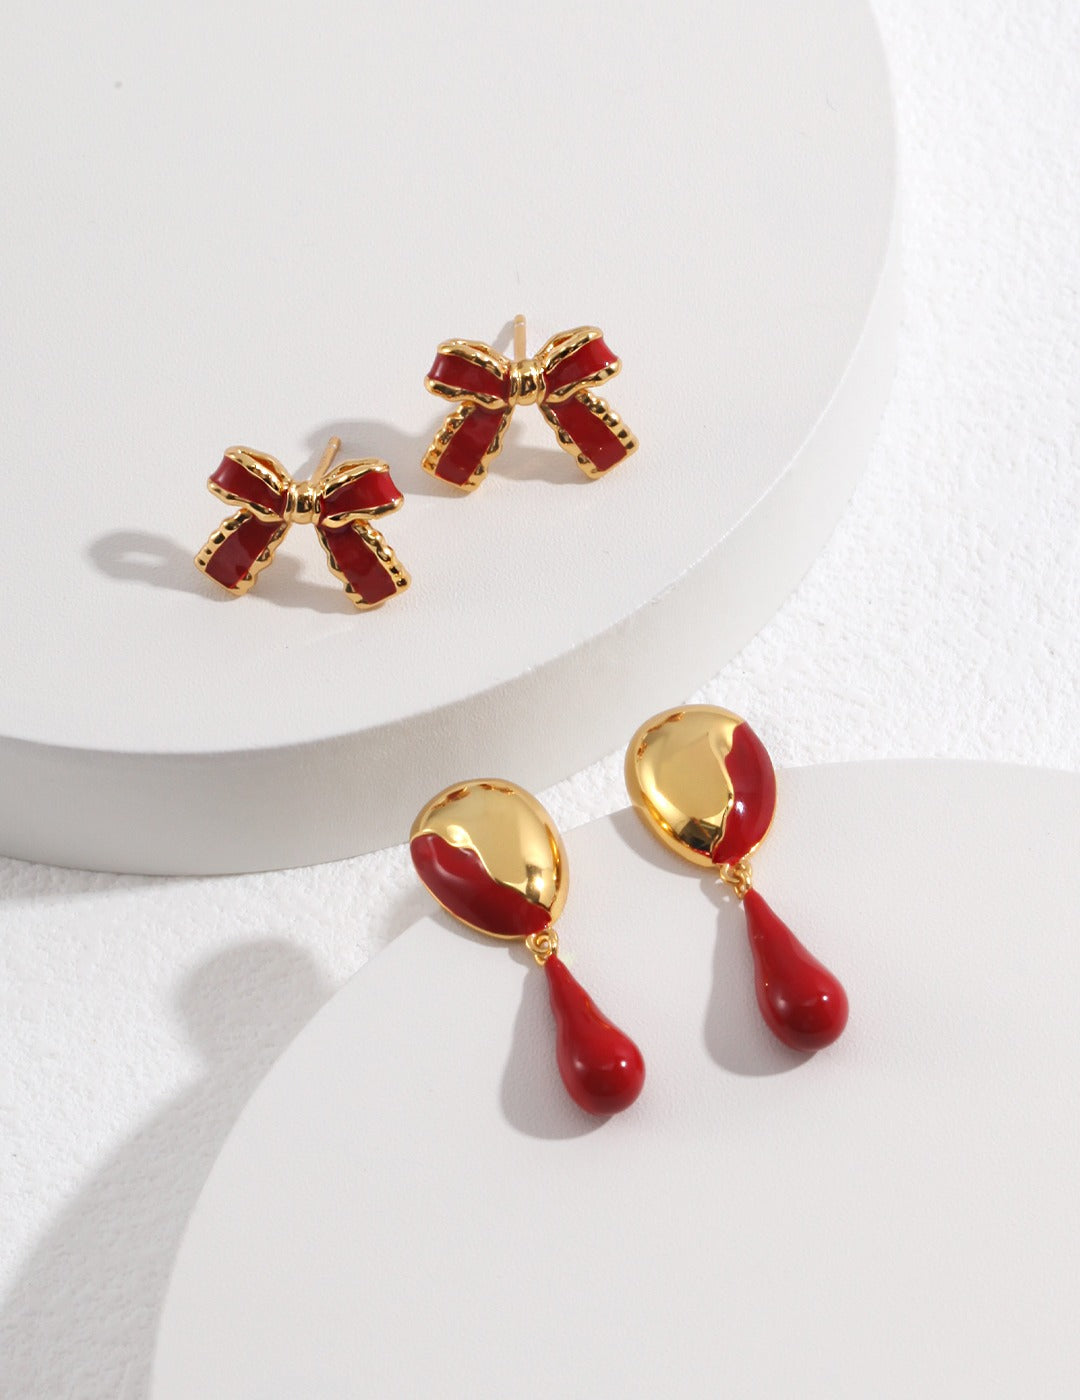 Earrings with Baroque Style Design and Red Drip Glaze that looks minimalist